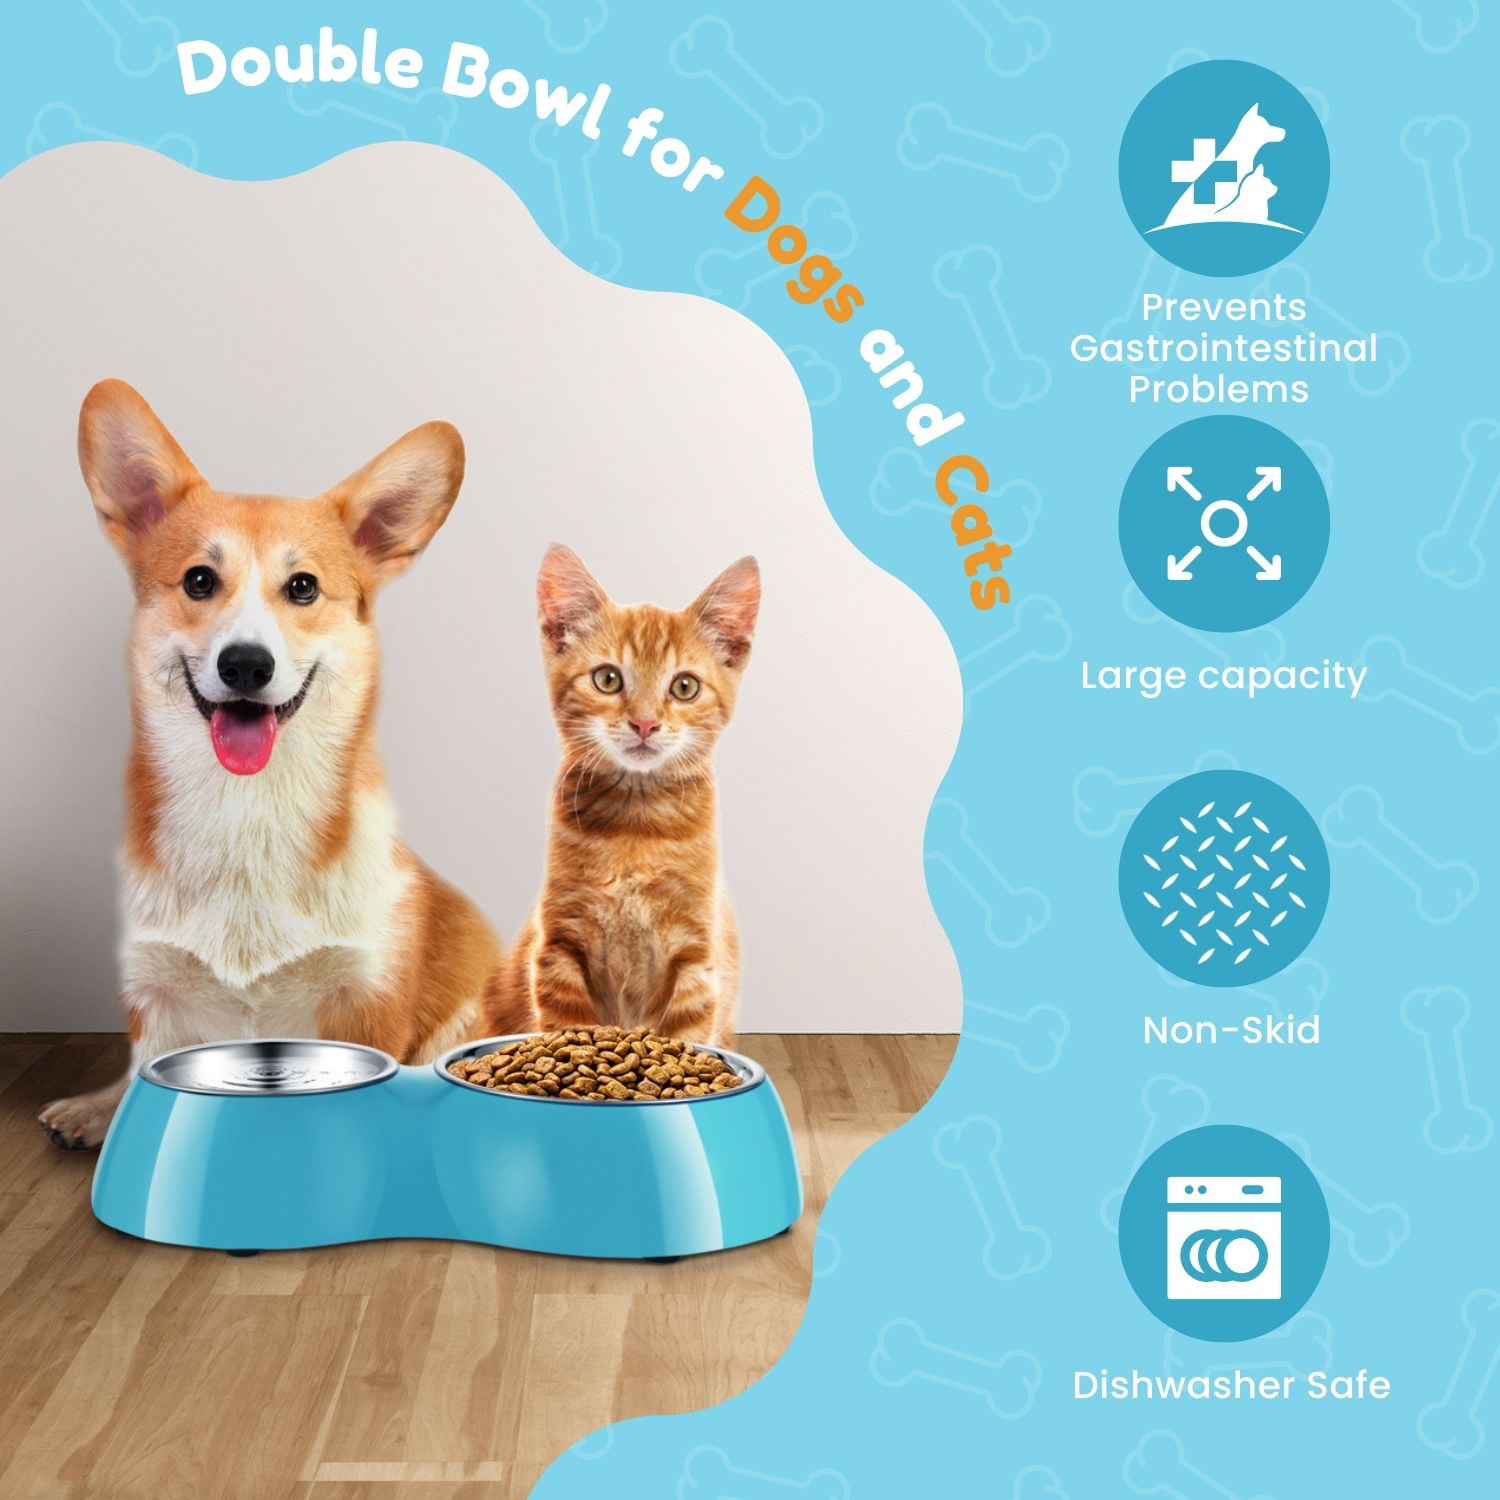 Flexzion Pet Feeder Bowls Double Stainless Steel (Set of 2) - Removable Raised Feeding Station Tray Dog Cat Puppies Animal Food Water Holder Container